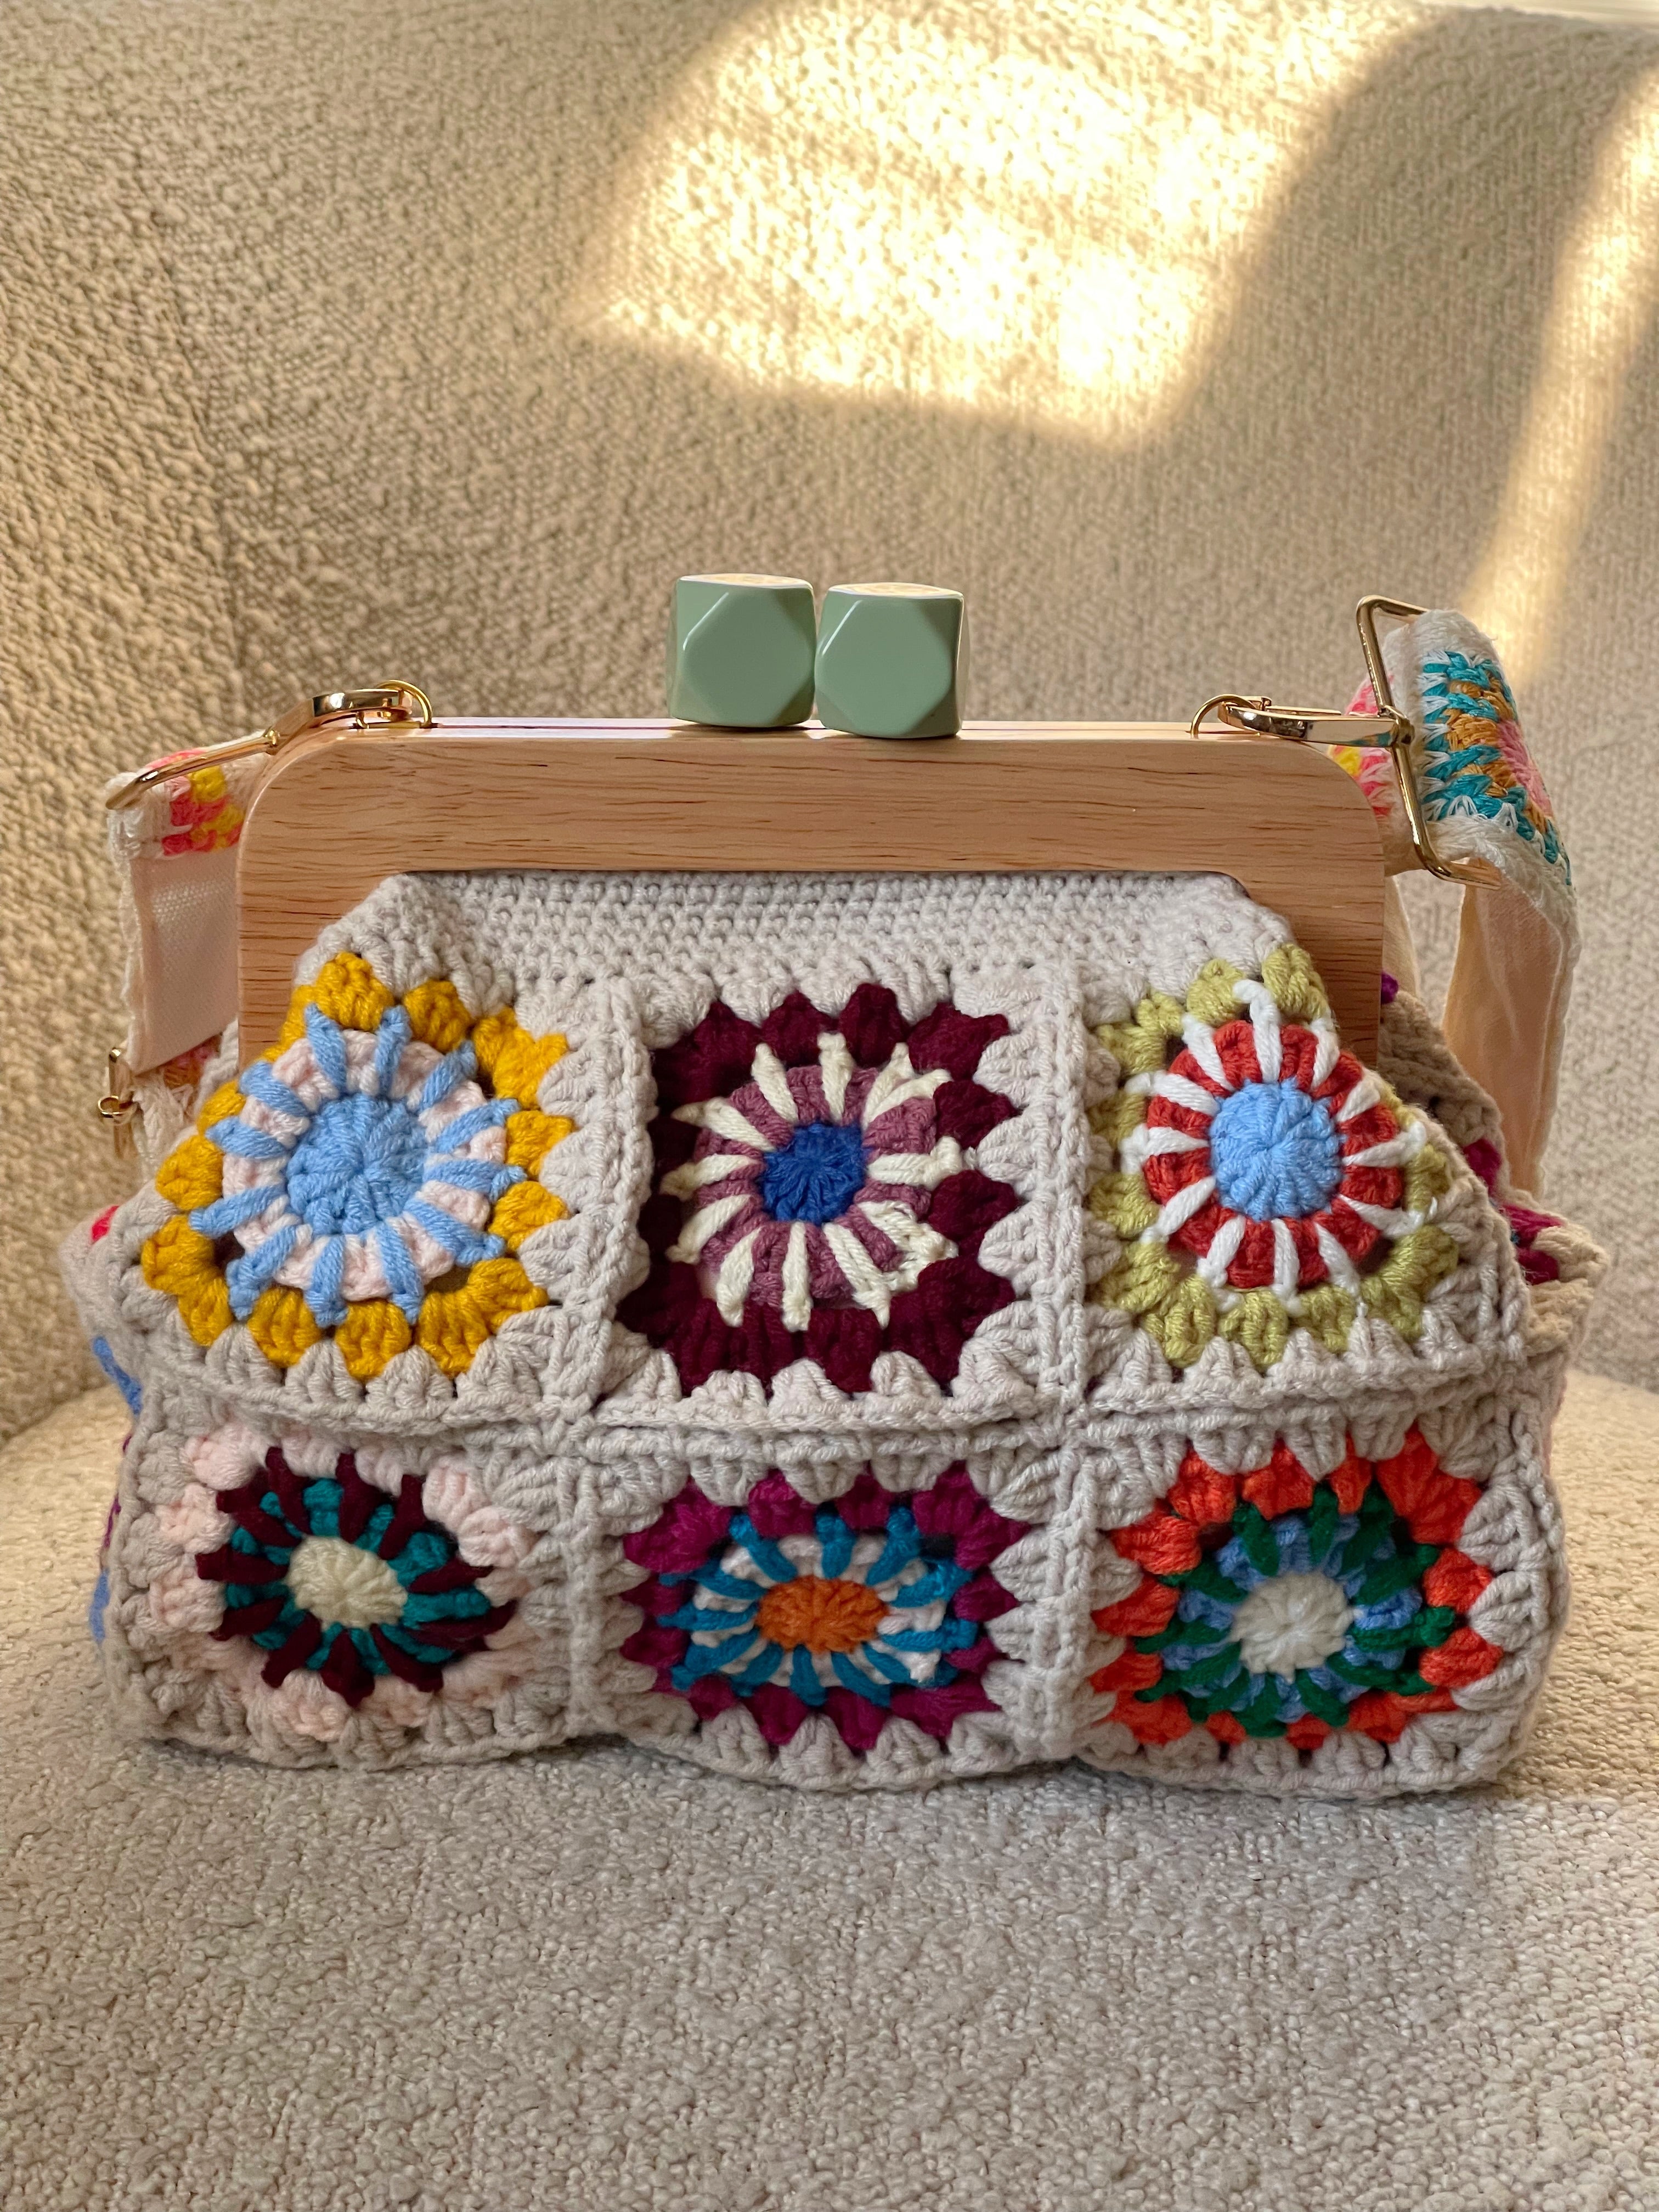 GOLDxTEAL stunning crochet knitted clutch with adjustable shoulder strap.